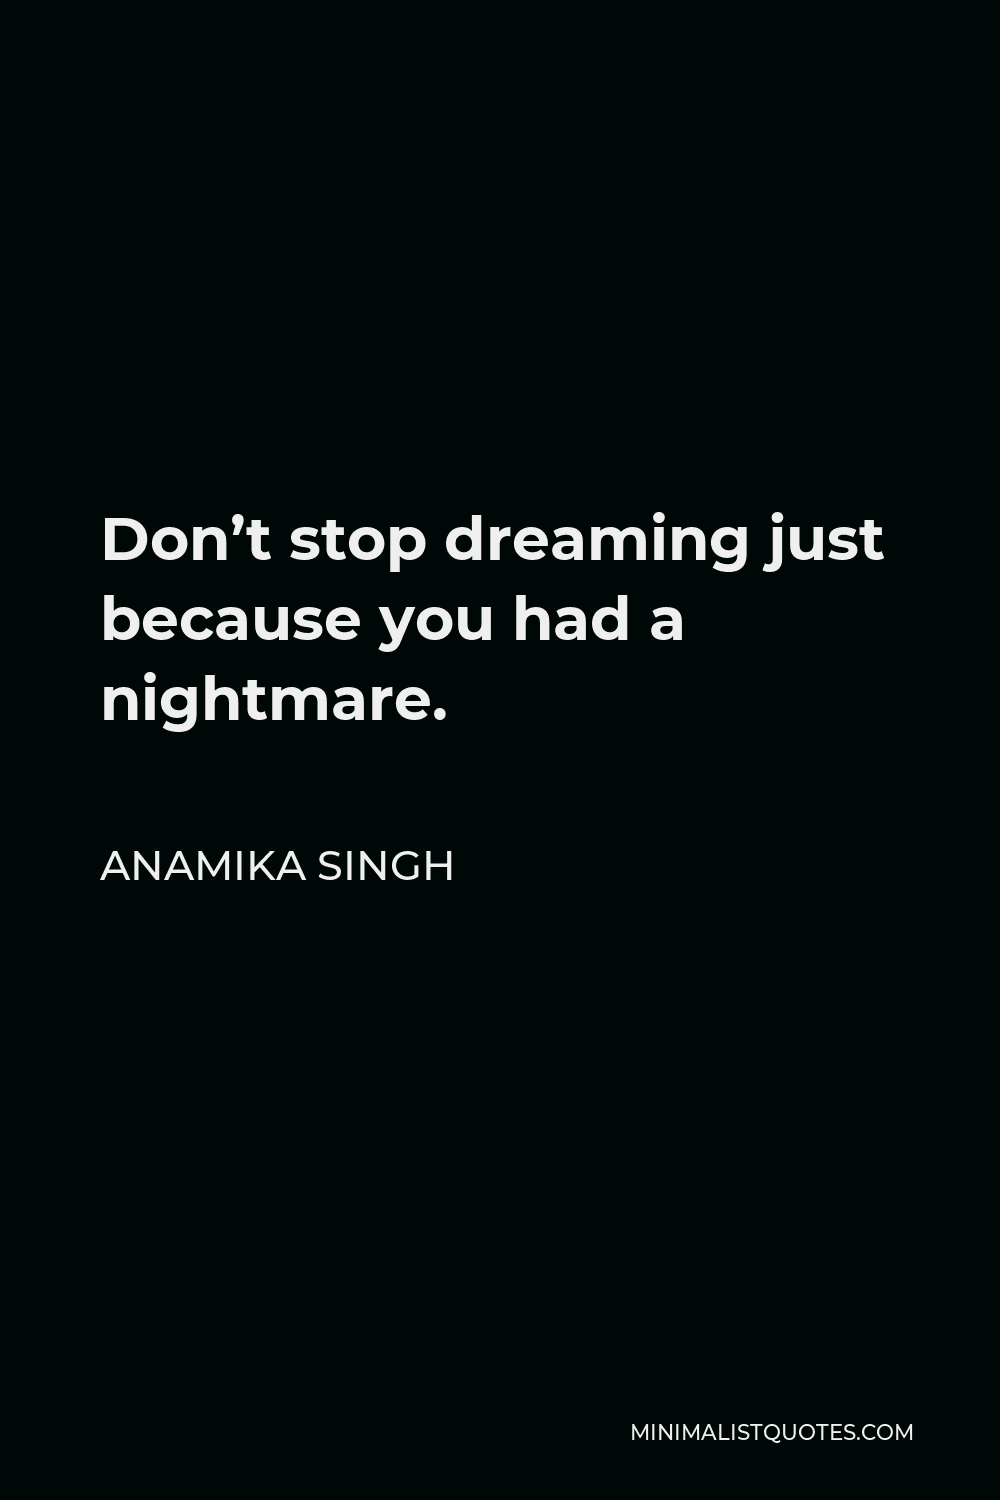 Anamika Singh Quote - Don’t stop dreaming just because you had a nightmare.